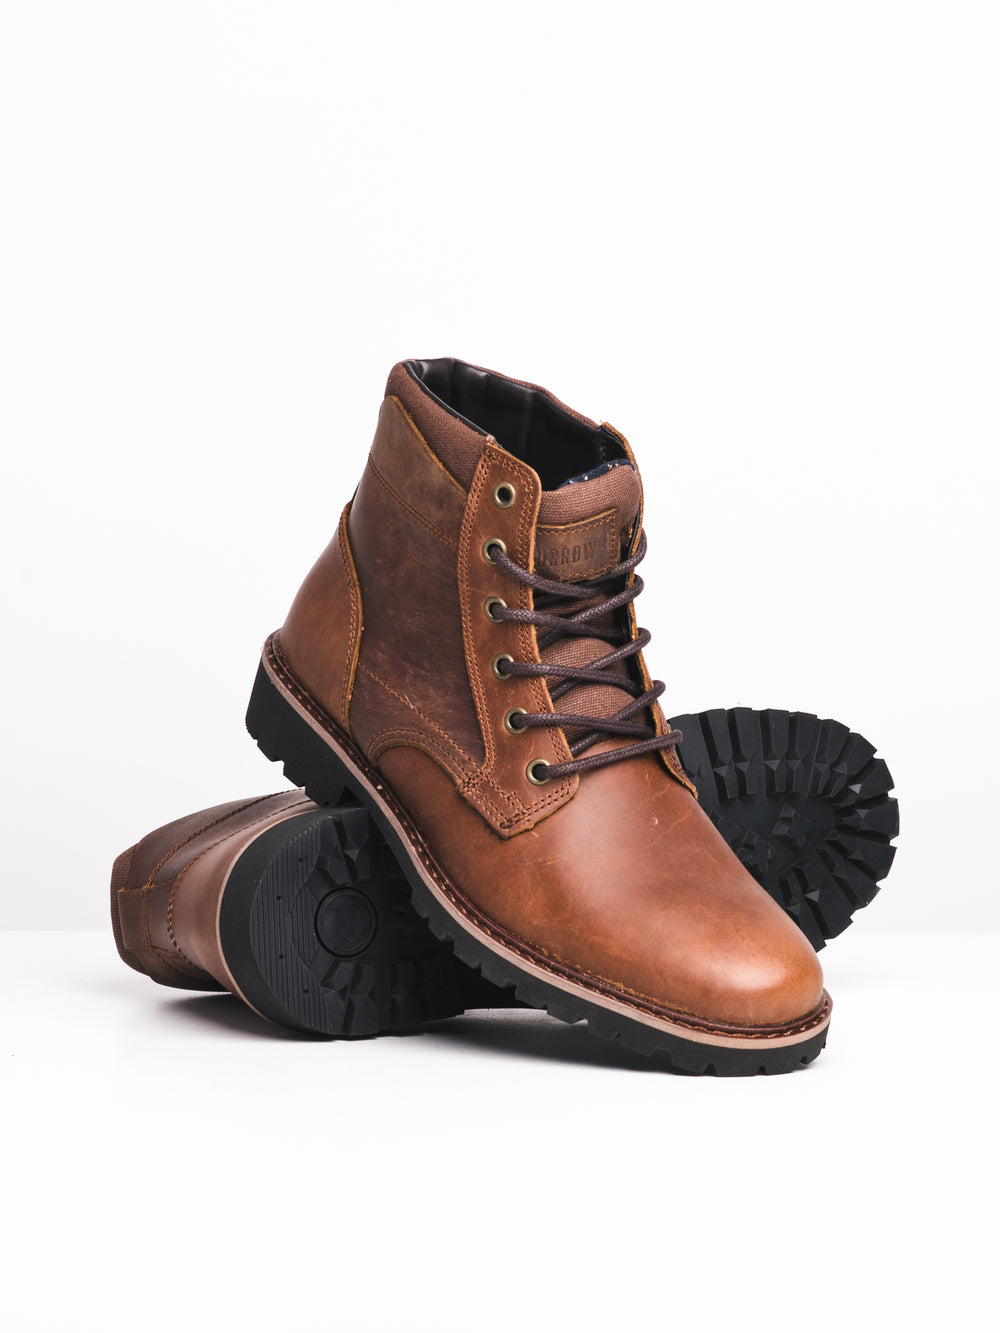 MENS FURROW WALLACE BOOTS - CLEARANCE